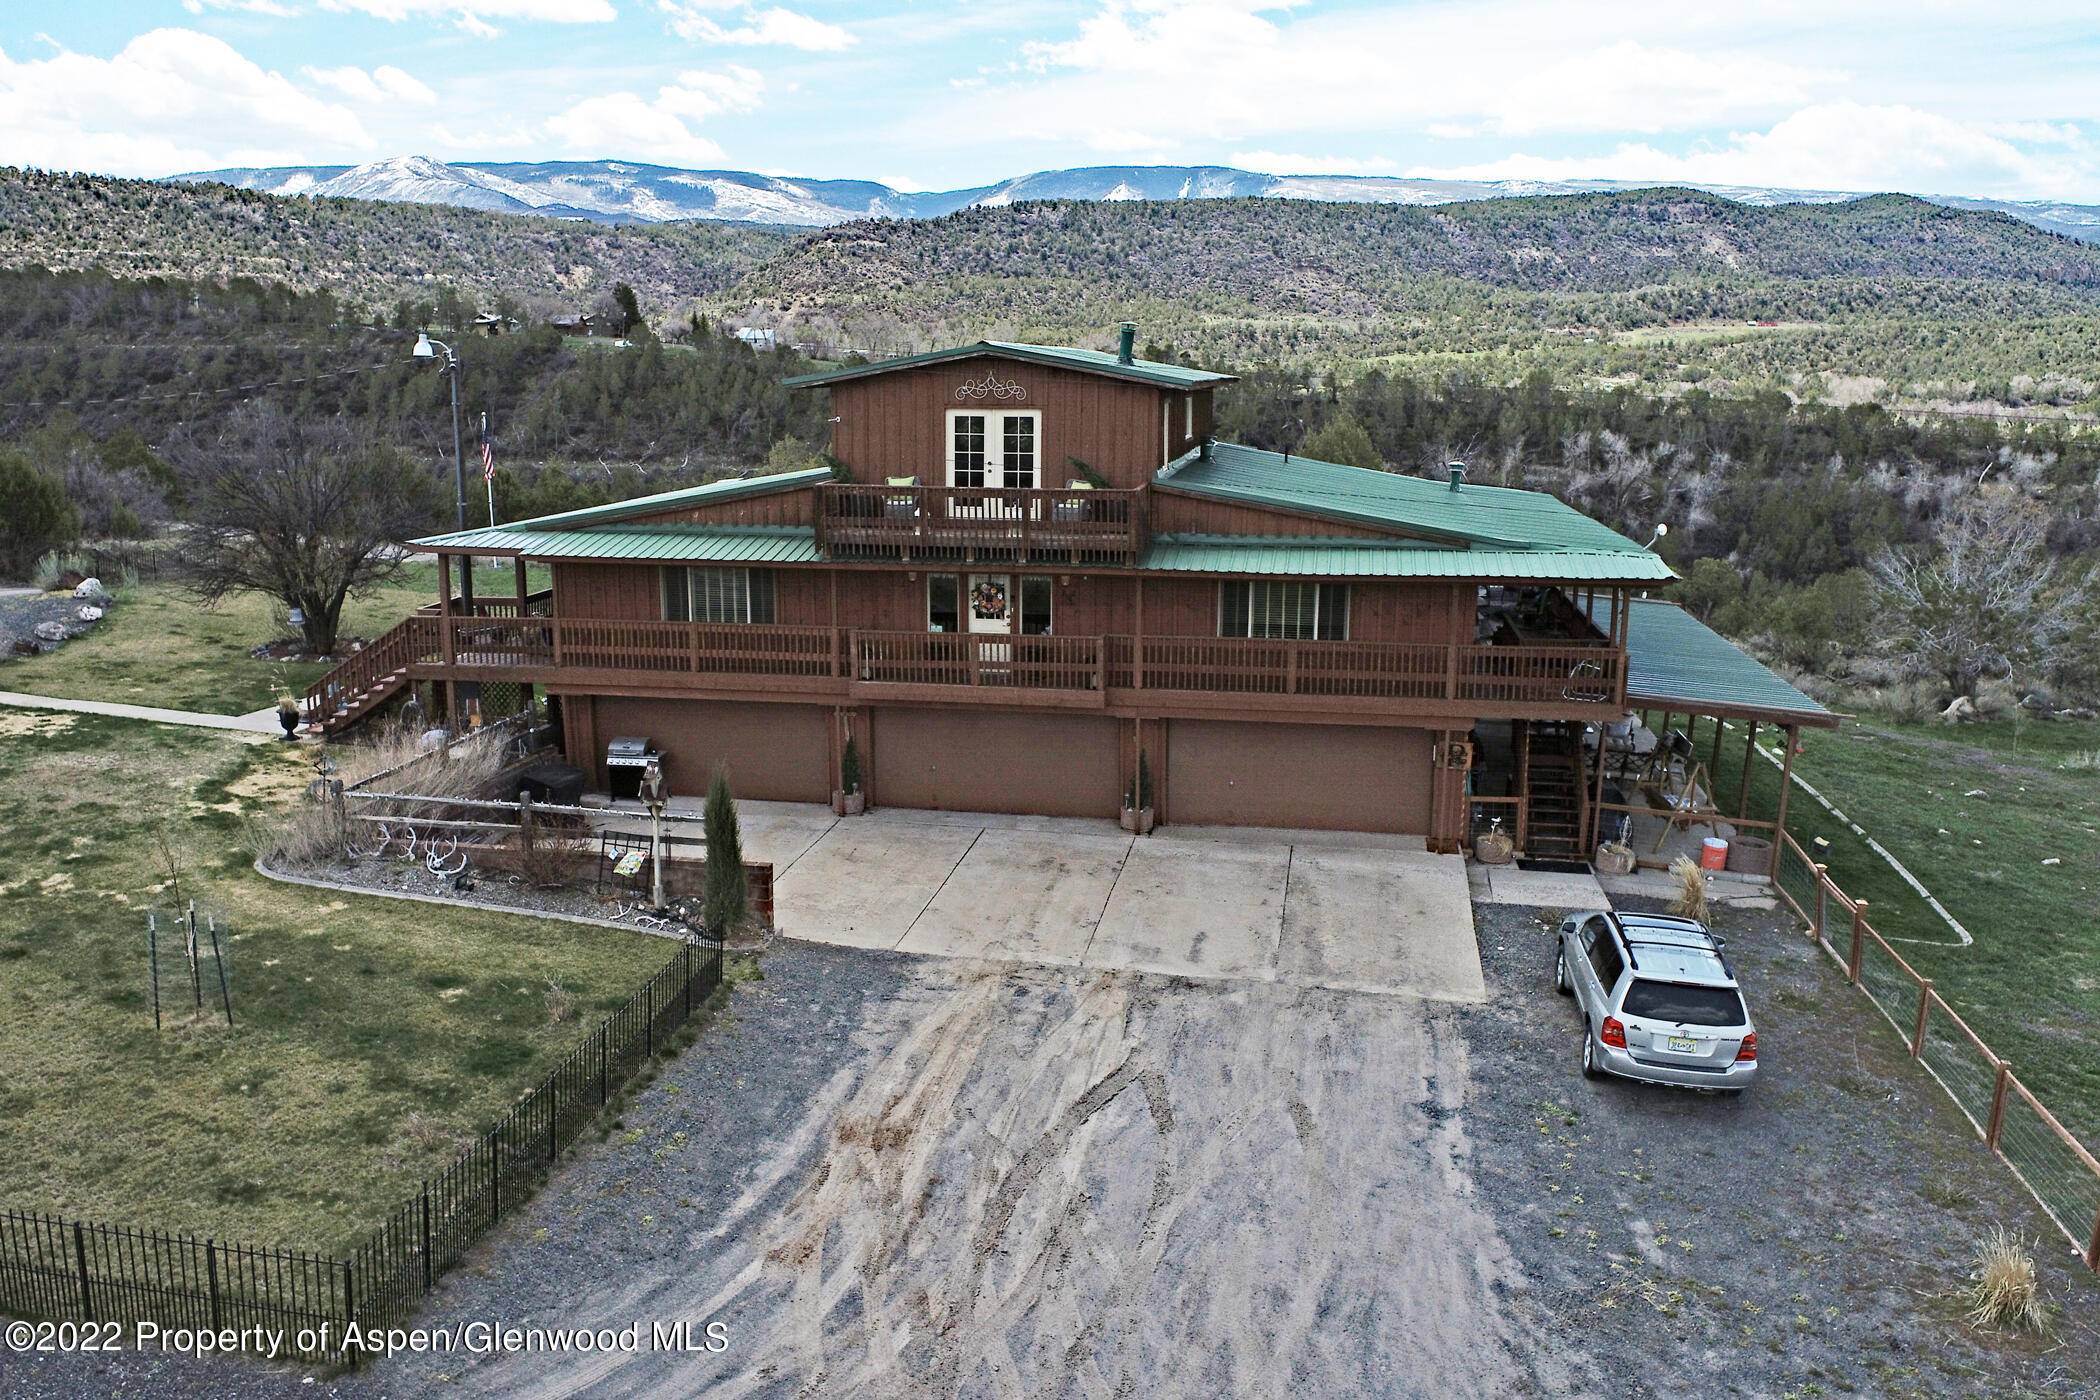 Stunning Colorado country home with many high end features surrounded by breathtaking mountain and valley views.